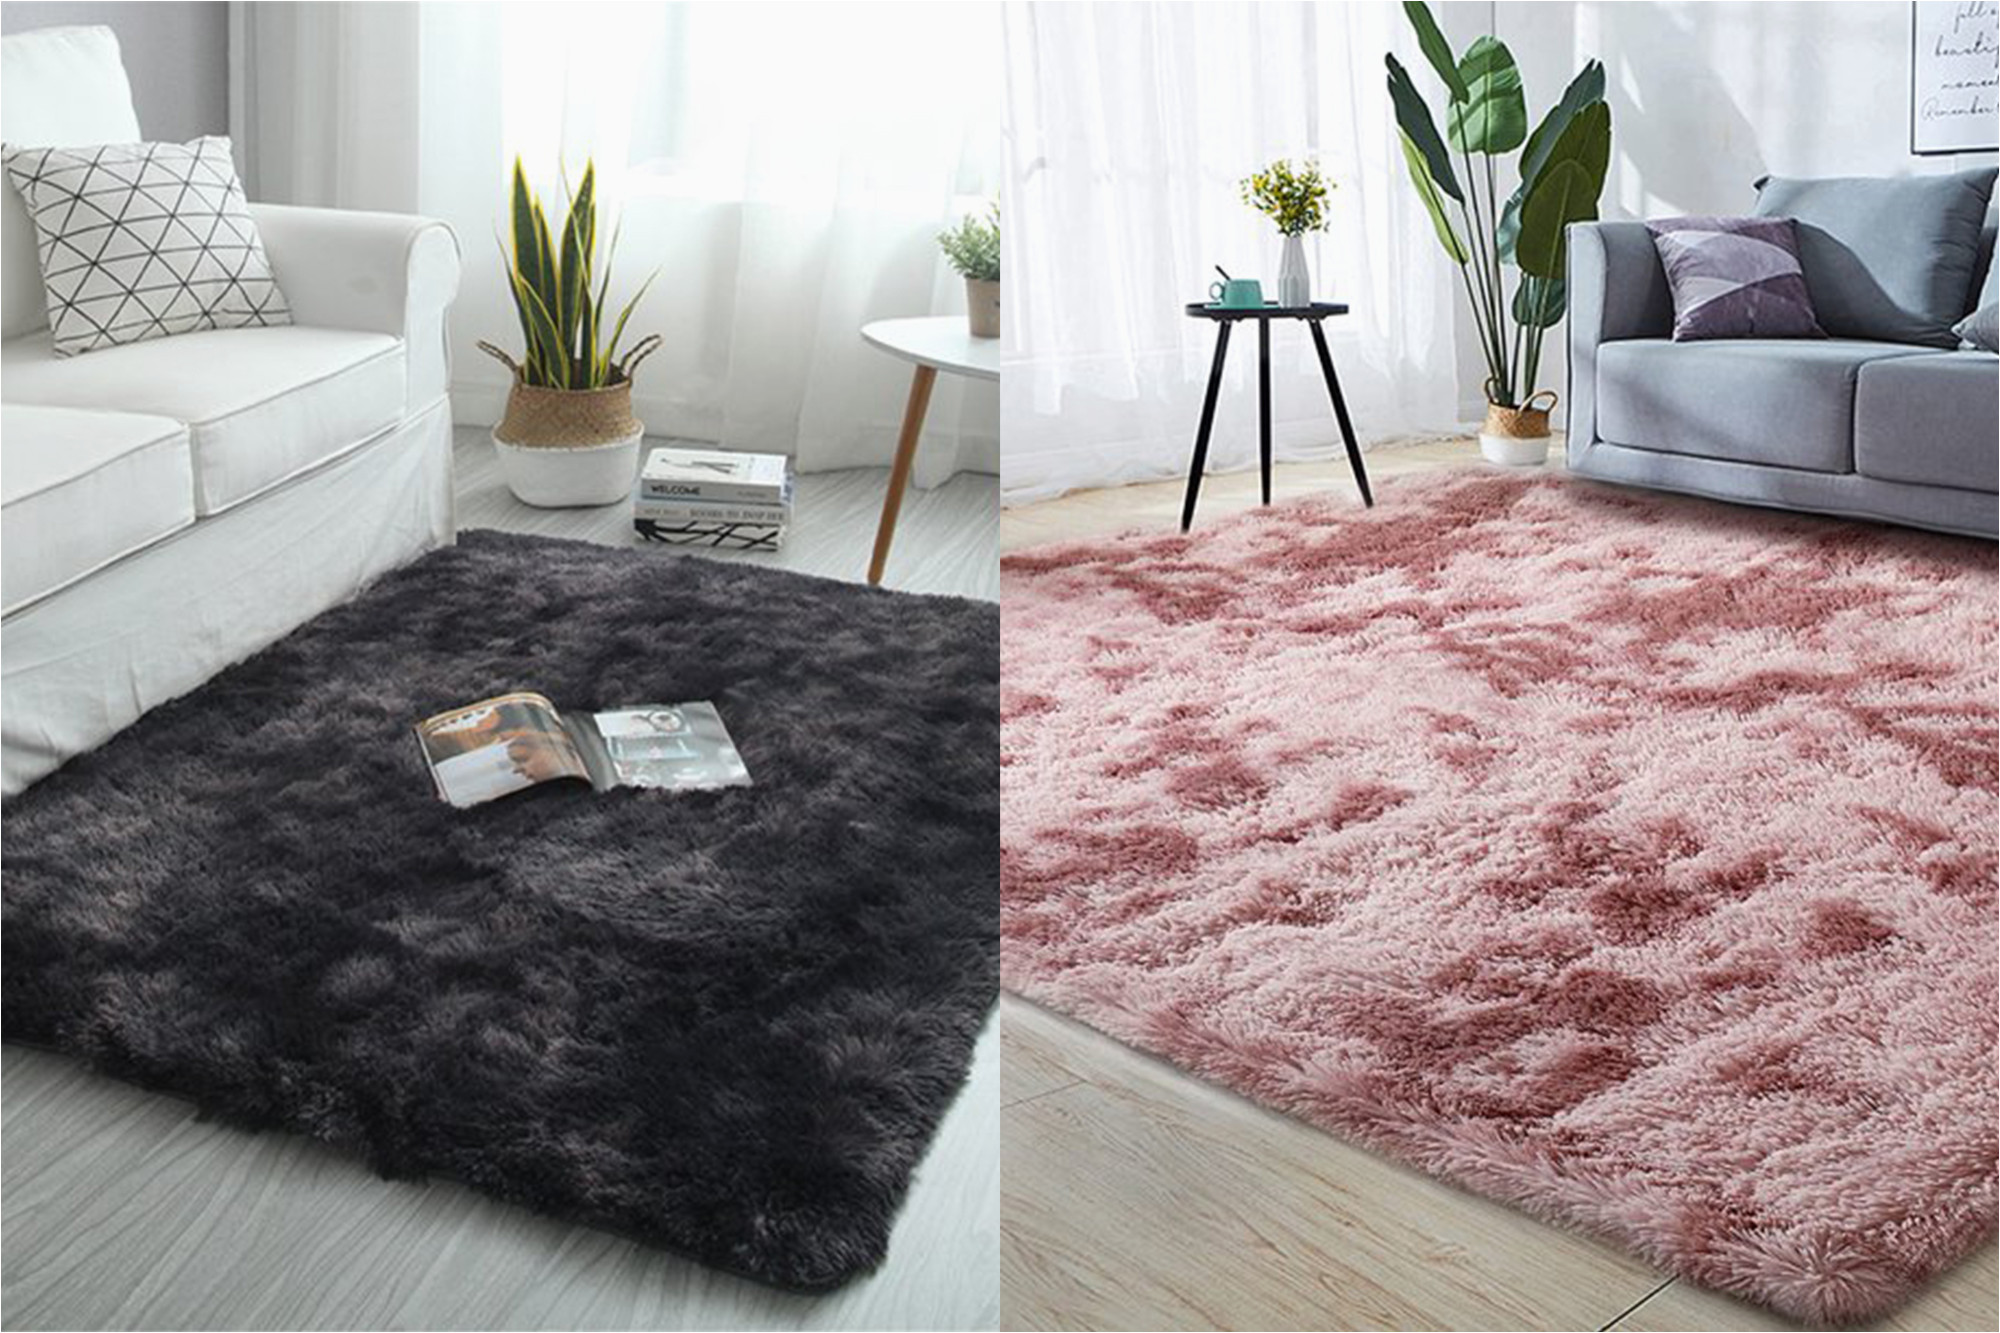 Quality area Rugs for Sale Walmart Has the Best Shaggy area Rug On Sale for Under $50